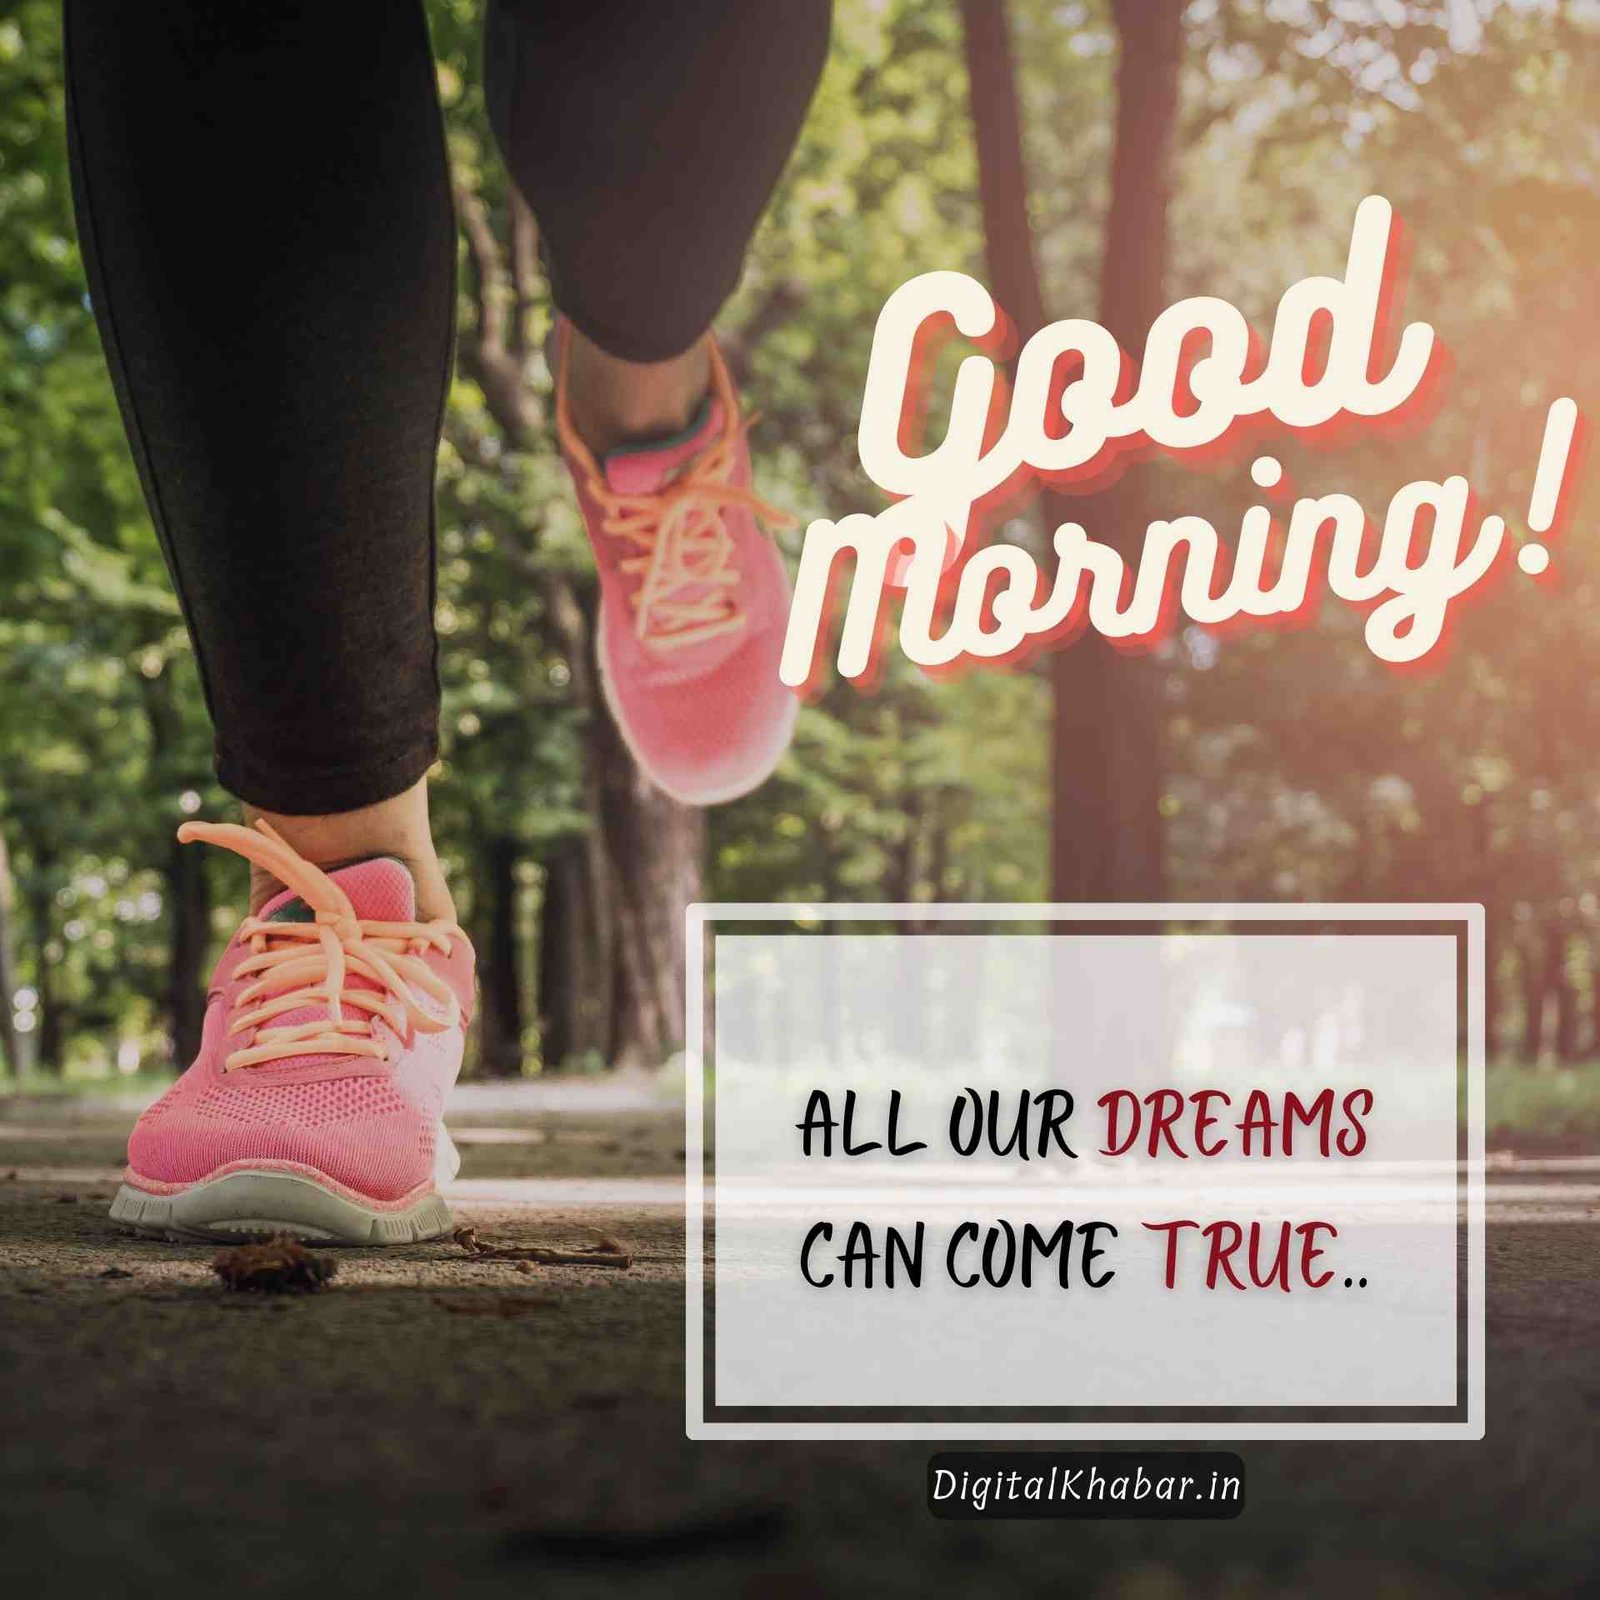 good morning images hd with positive words